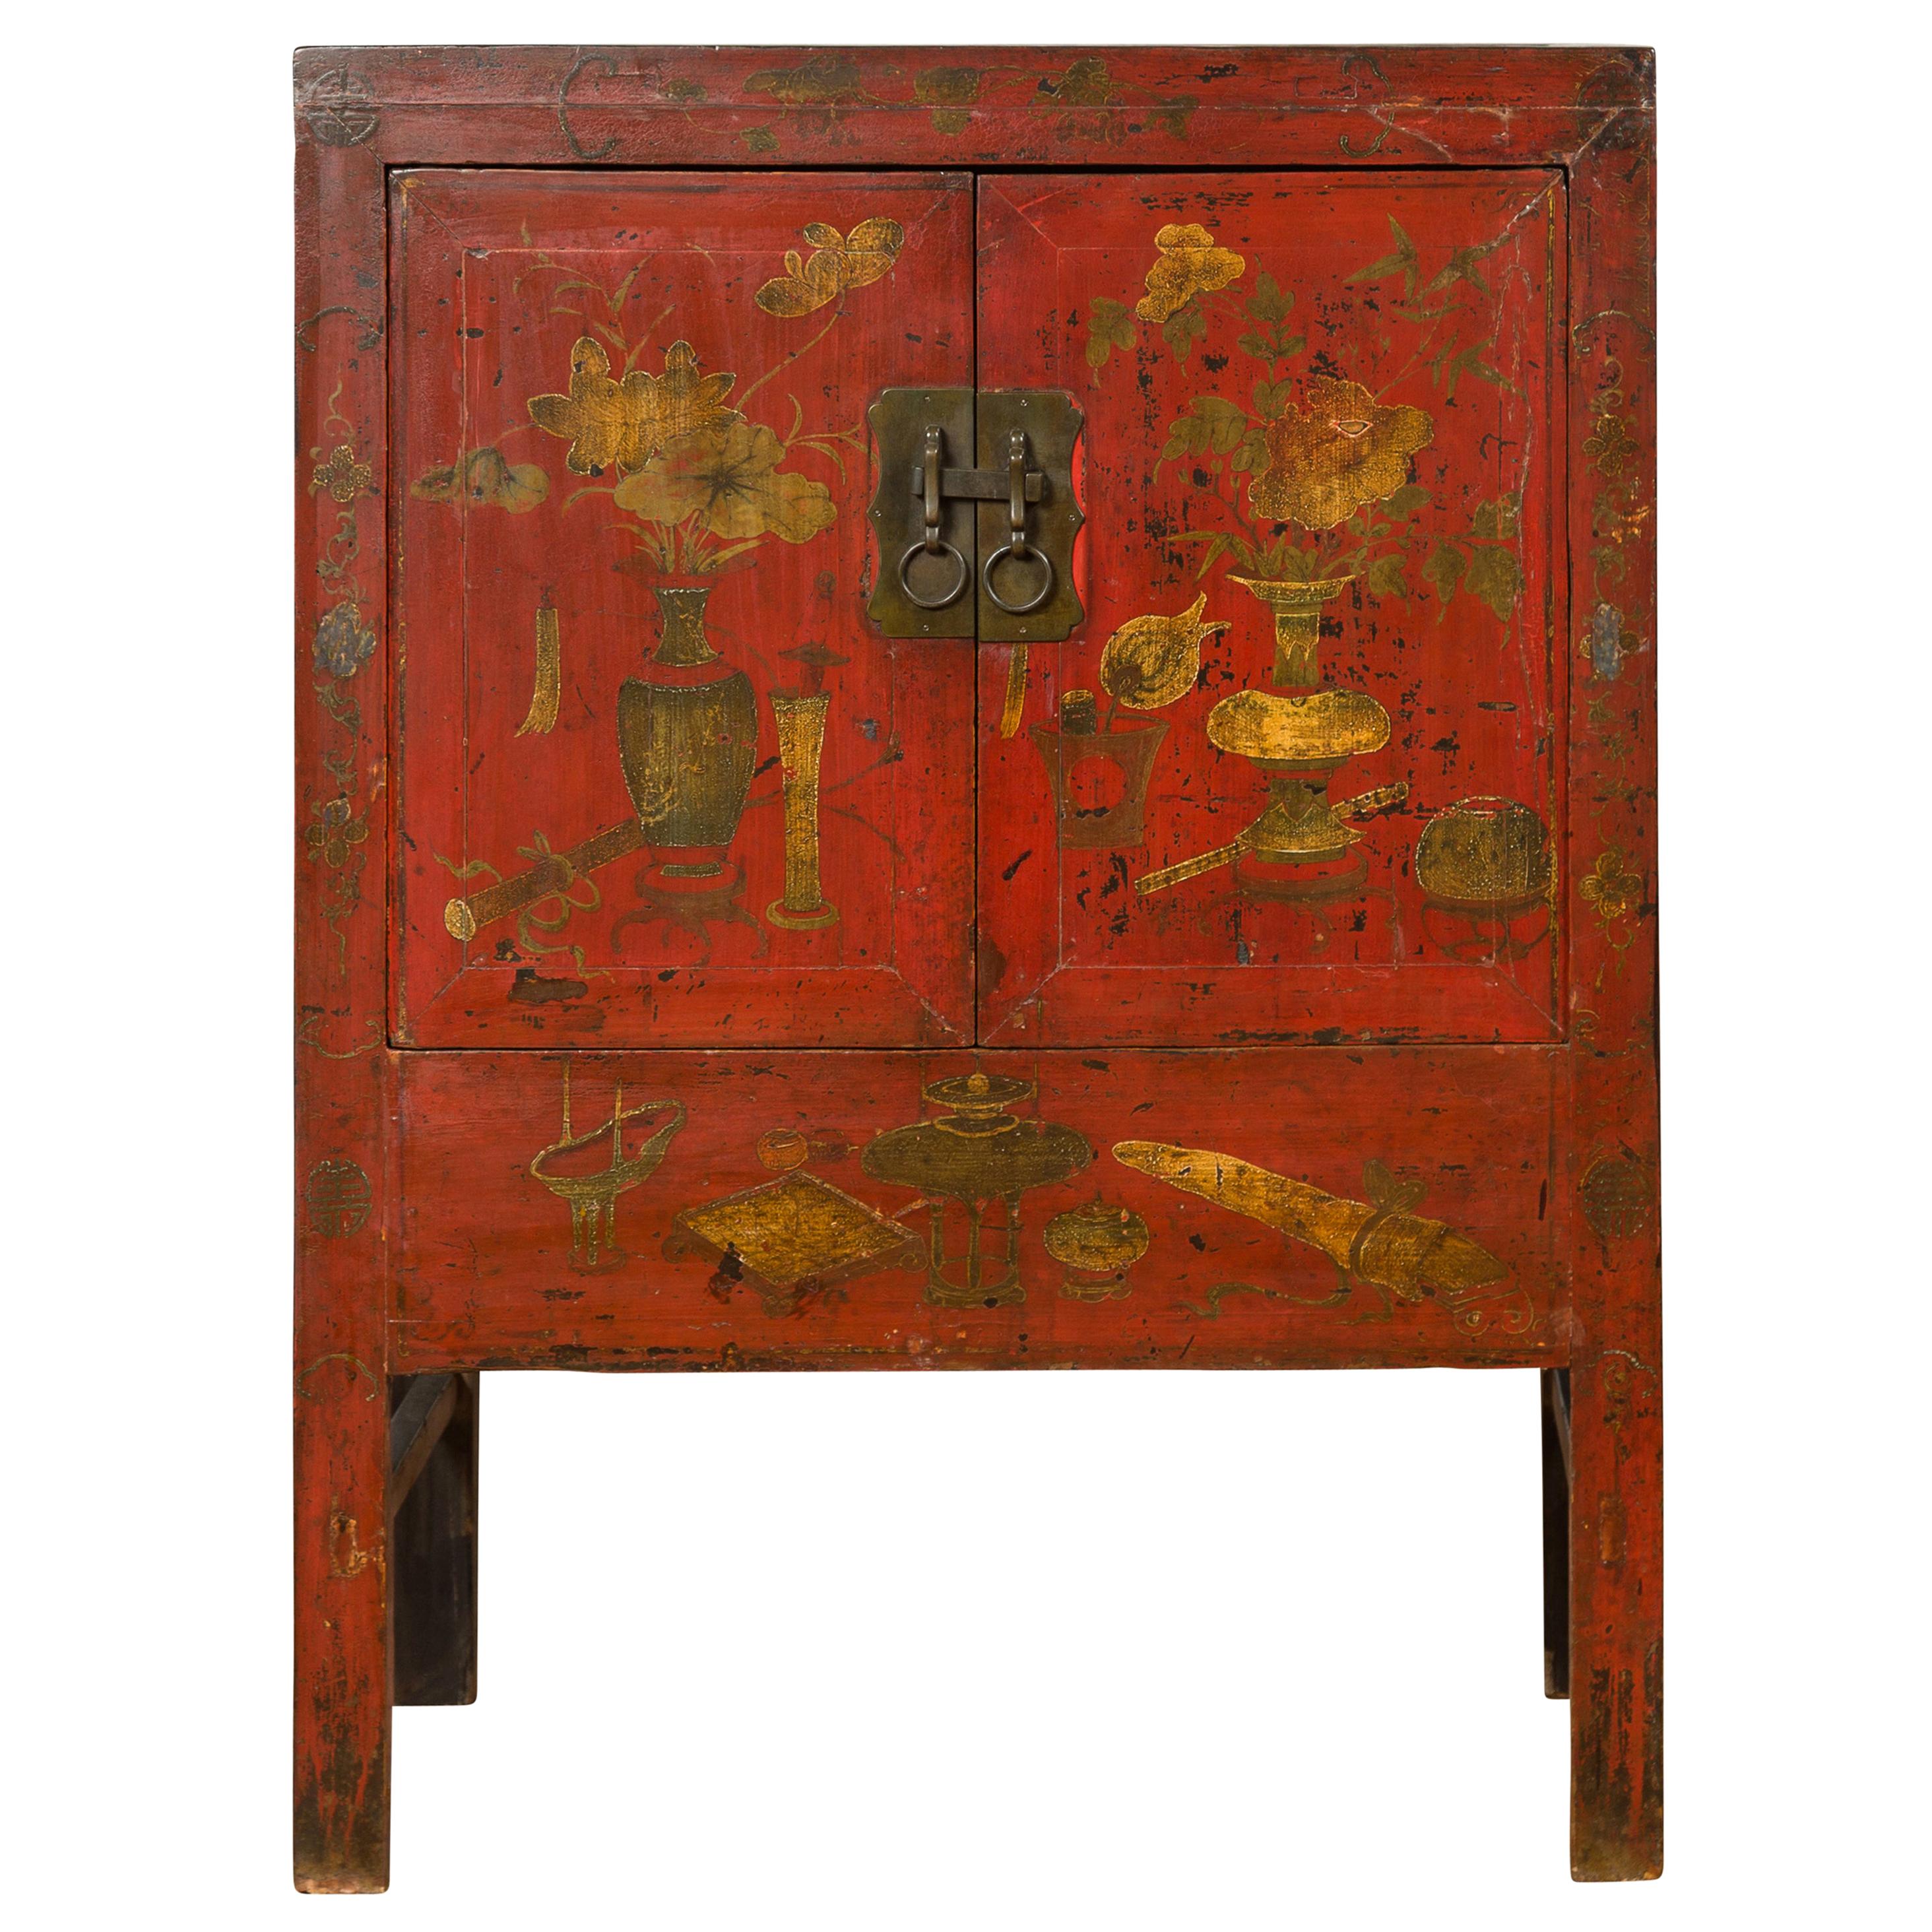 Chinese Antique Red Lacquered Armoire with Distressed Gold Floral Motifs